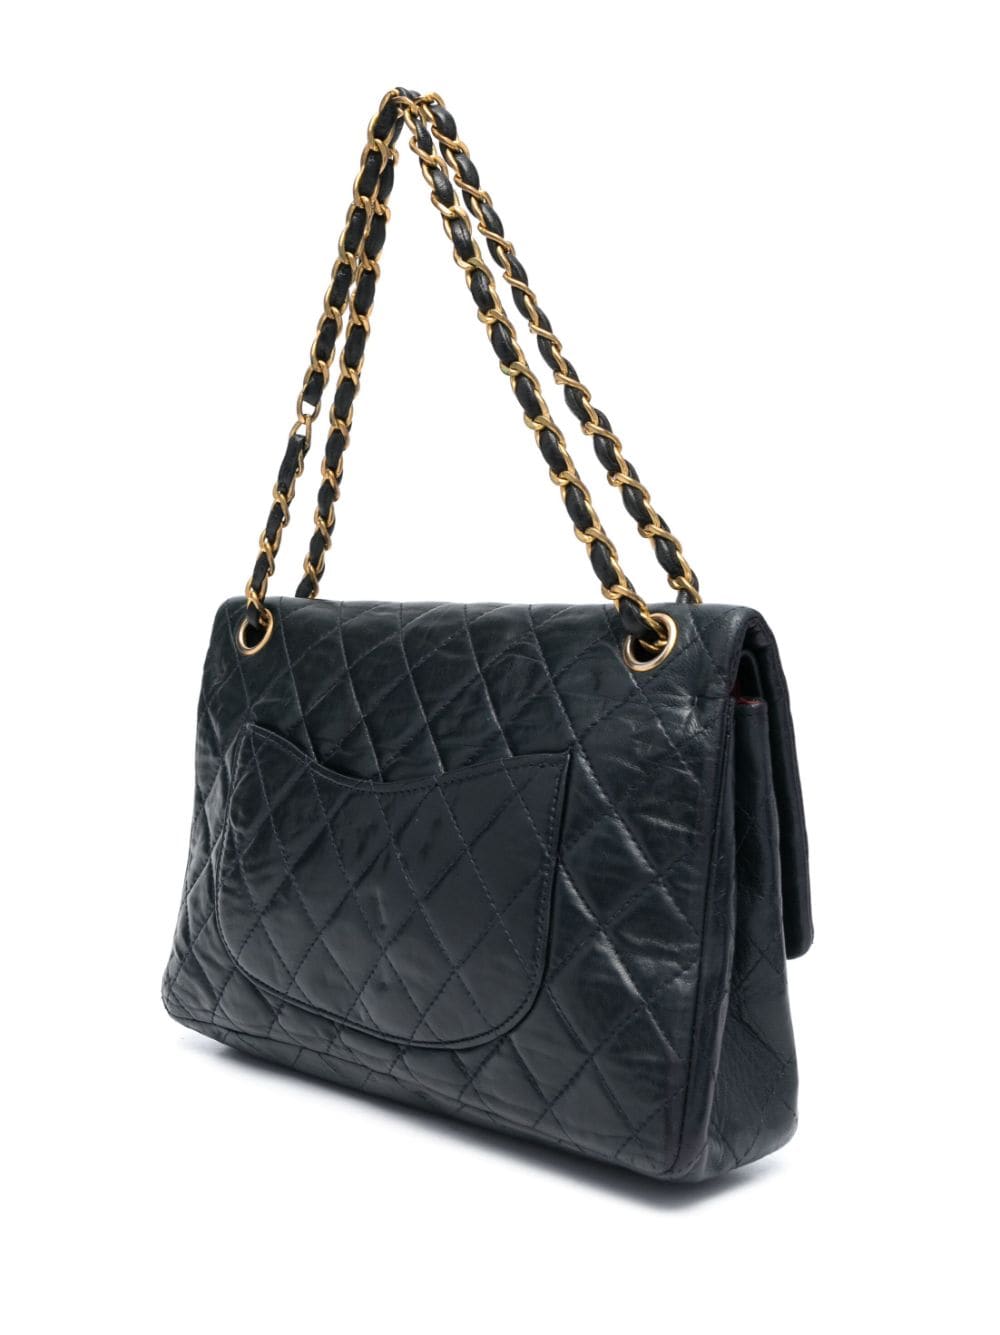 Chanel Pre-owned 1962-1964 2.55 Diamond-Quilted Shoulder Bag - Blue